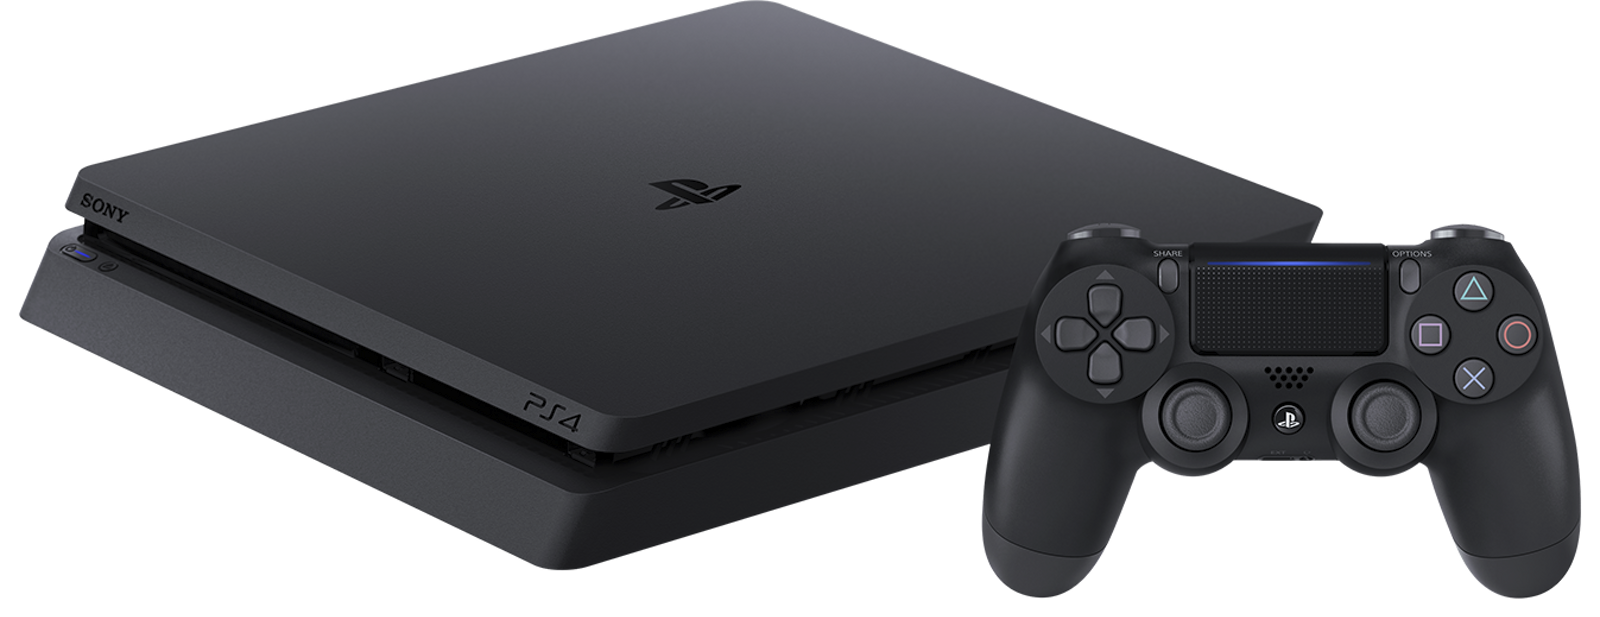 PS4 System Software Update 9.00 reportedly causing performance issues in some - NotebookCheck.net News